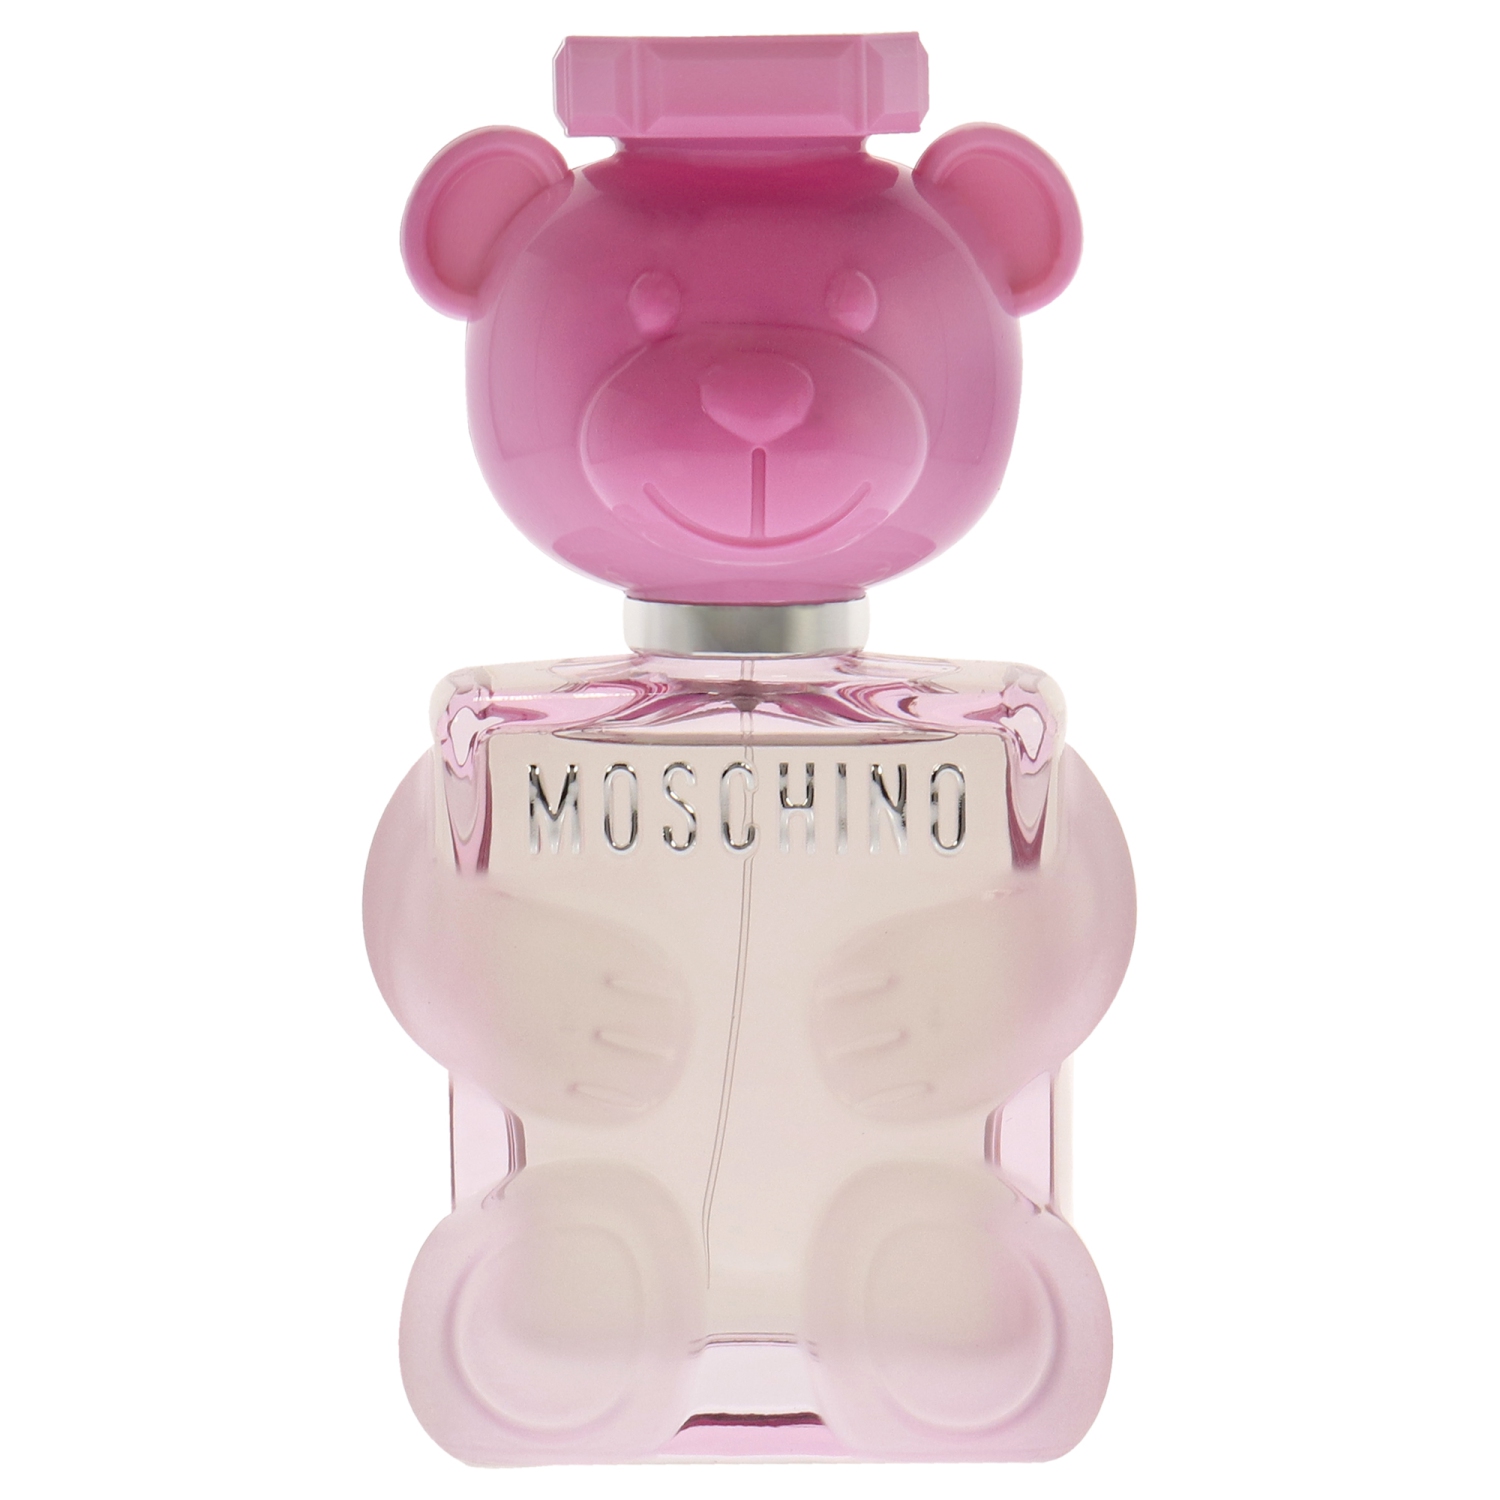 Moschino Toy 2 Bubble Gum by Moschino for Women - 3.4 oz EDT Spray